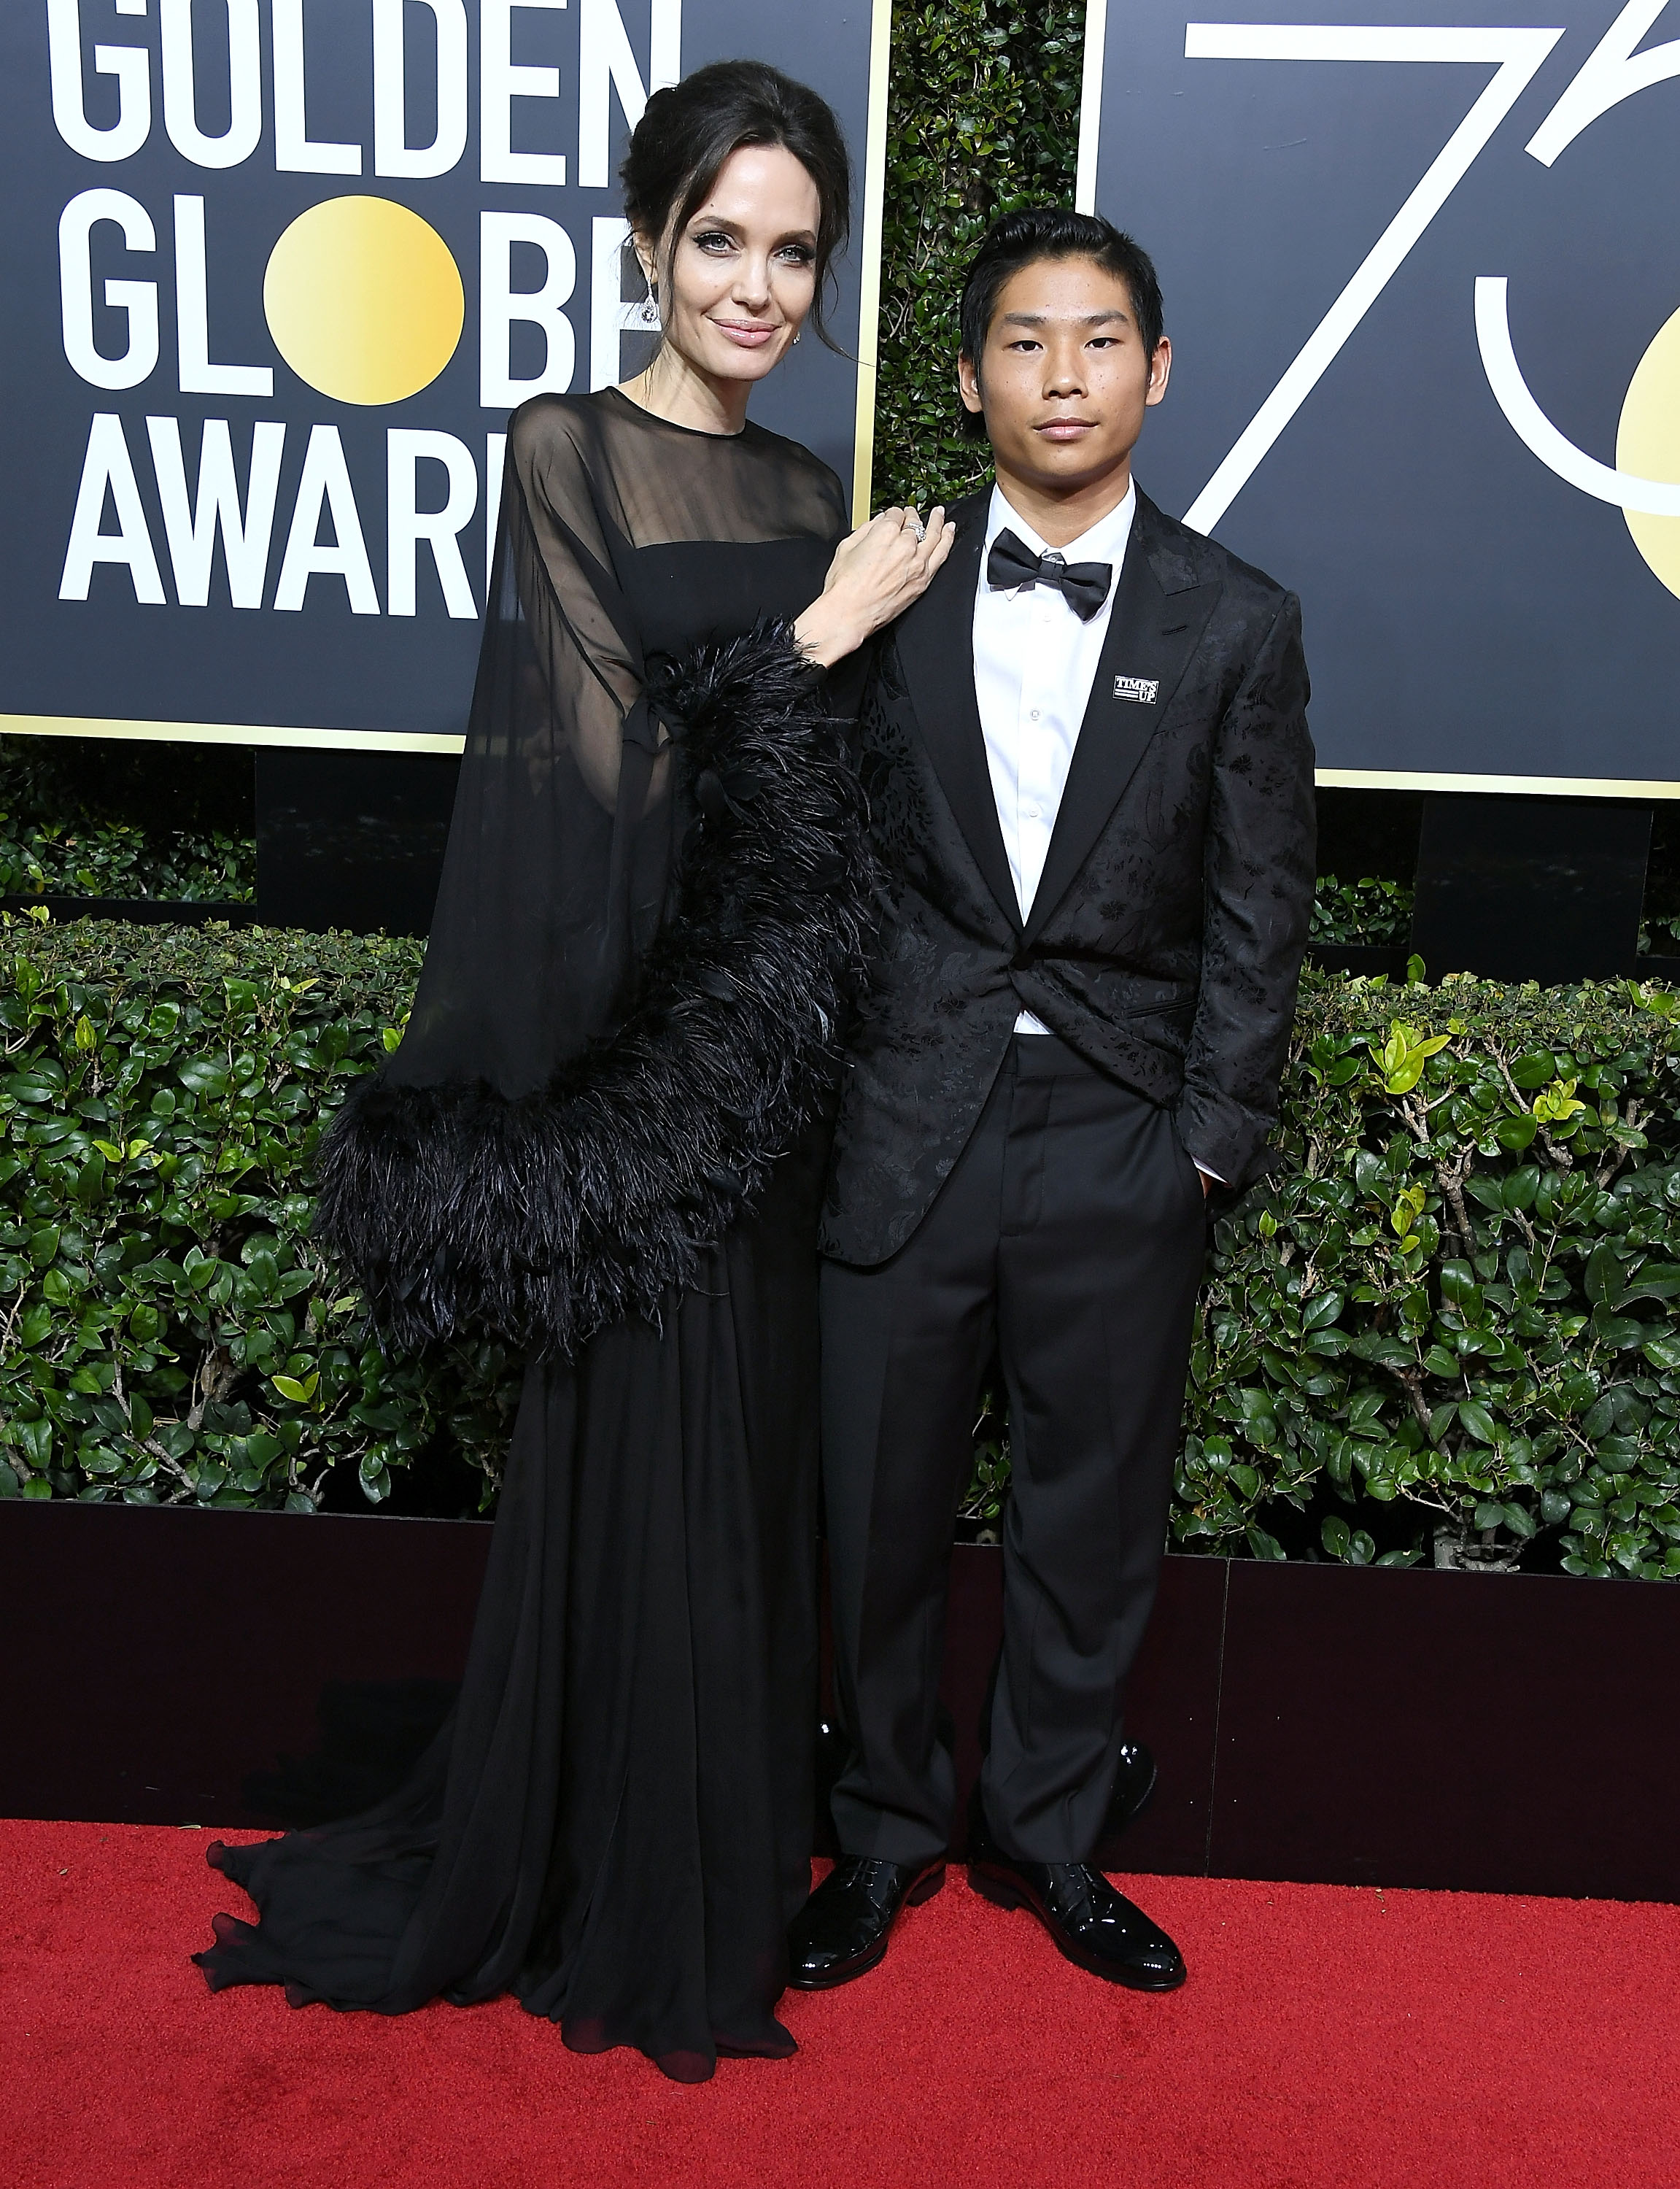 Angelina Jolie and Pax Thien Jolie-Pitt at the 75th Annual Golden Globe Awards in Beverly Hills, California on January 7, 2018 | Source: Getty Images